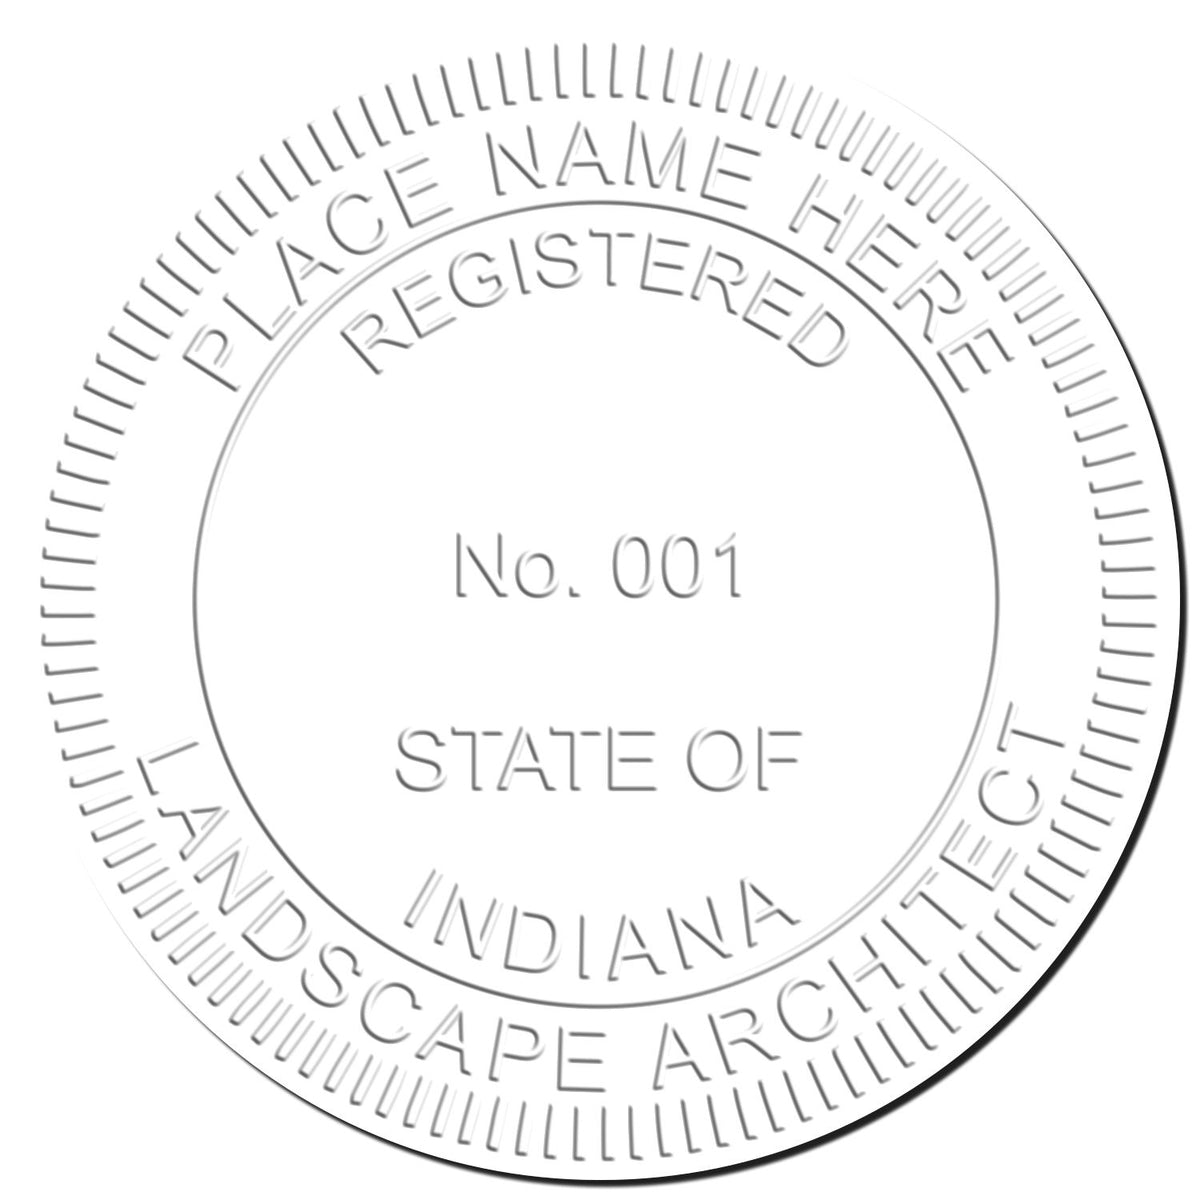 This paper is stamped with a sample imprint of the Hybrid Indiana Landscape Architect Seal, signifying its quality and reliability.